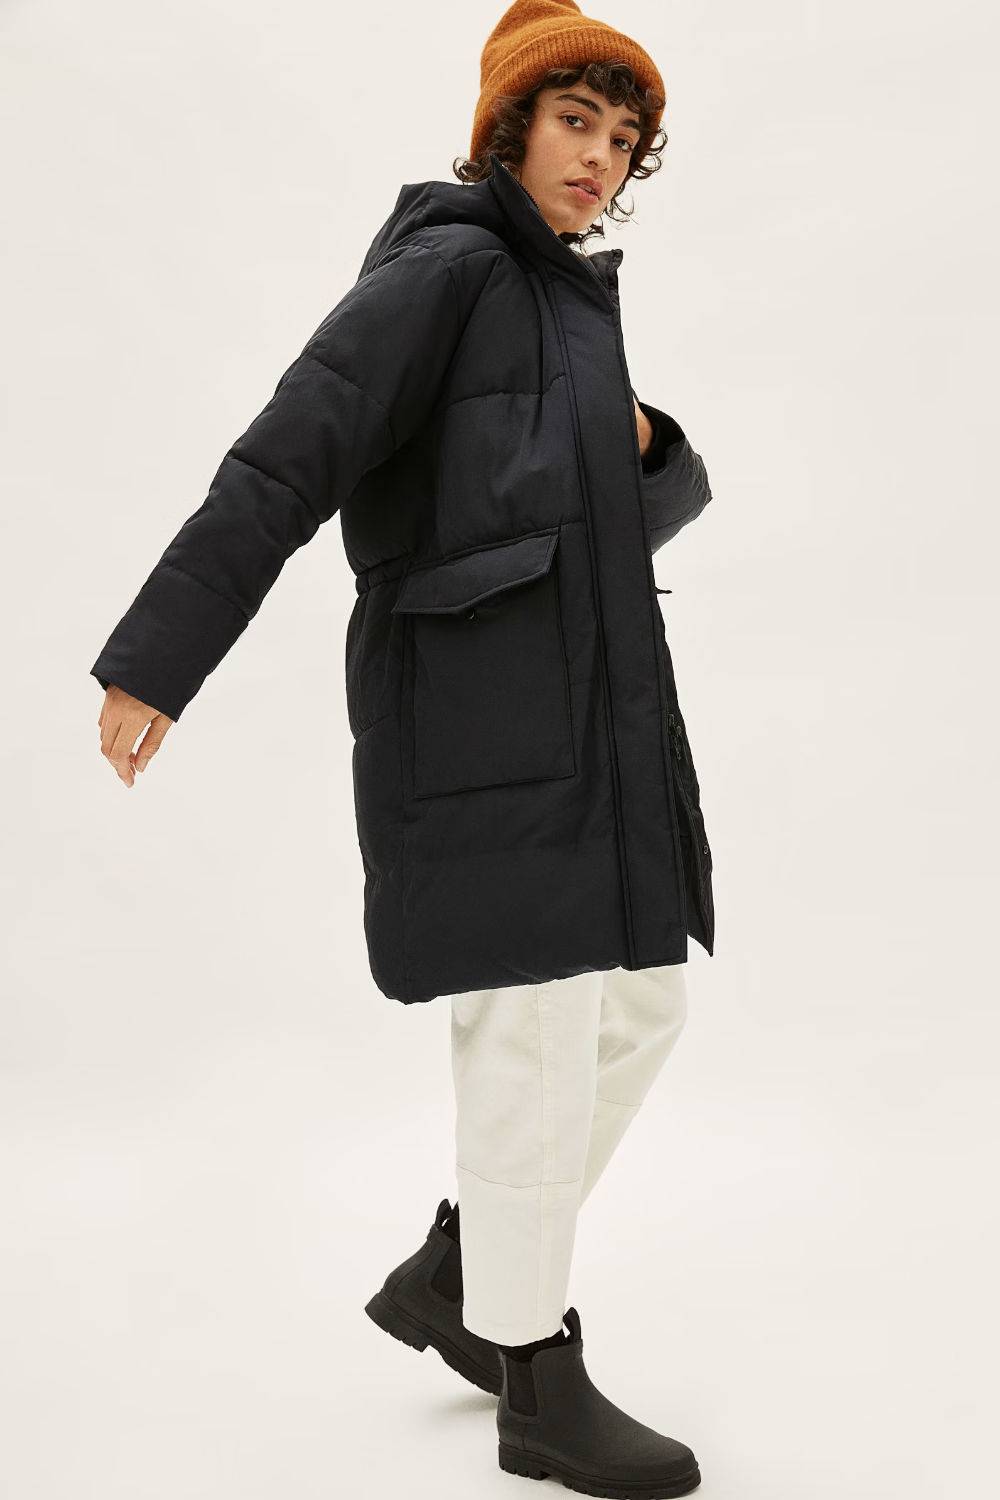 everlane recycled puffer jacket